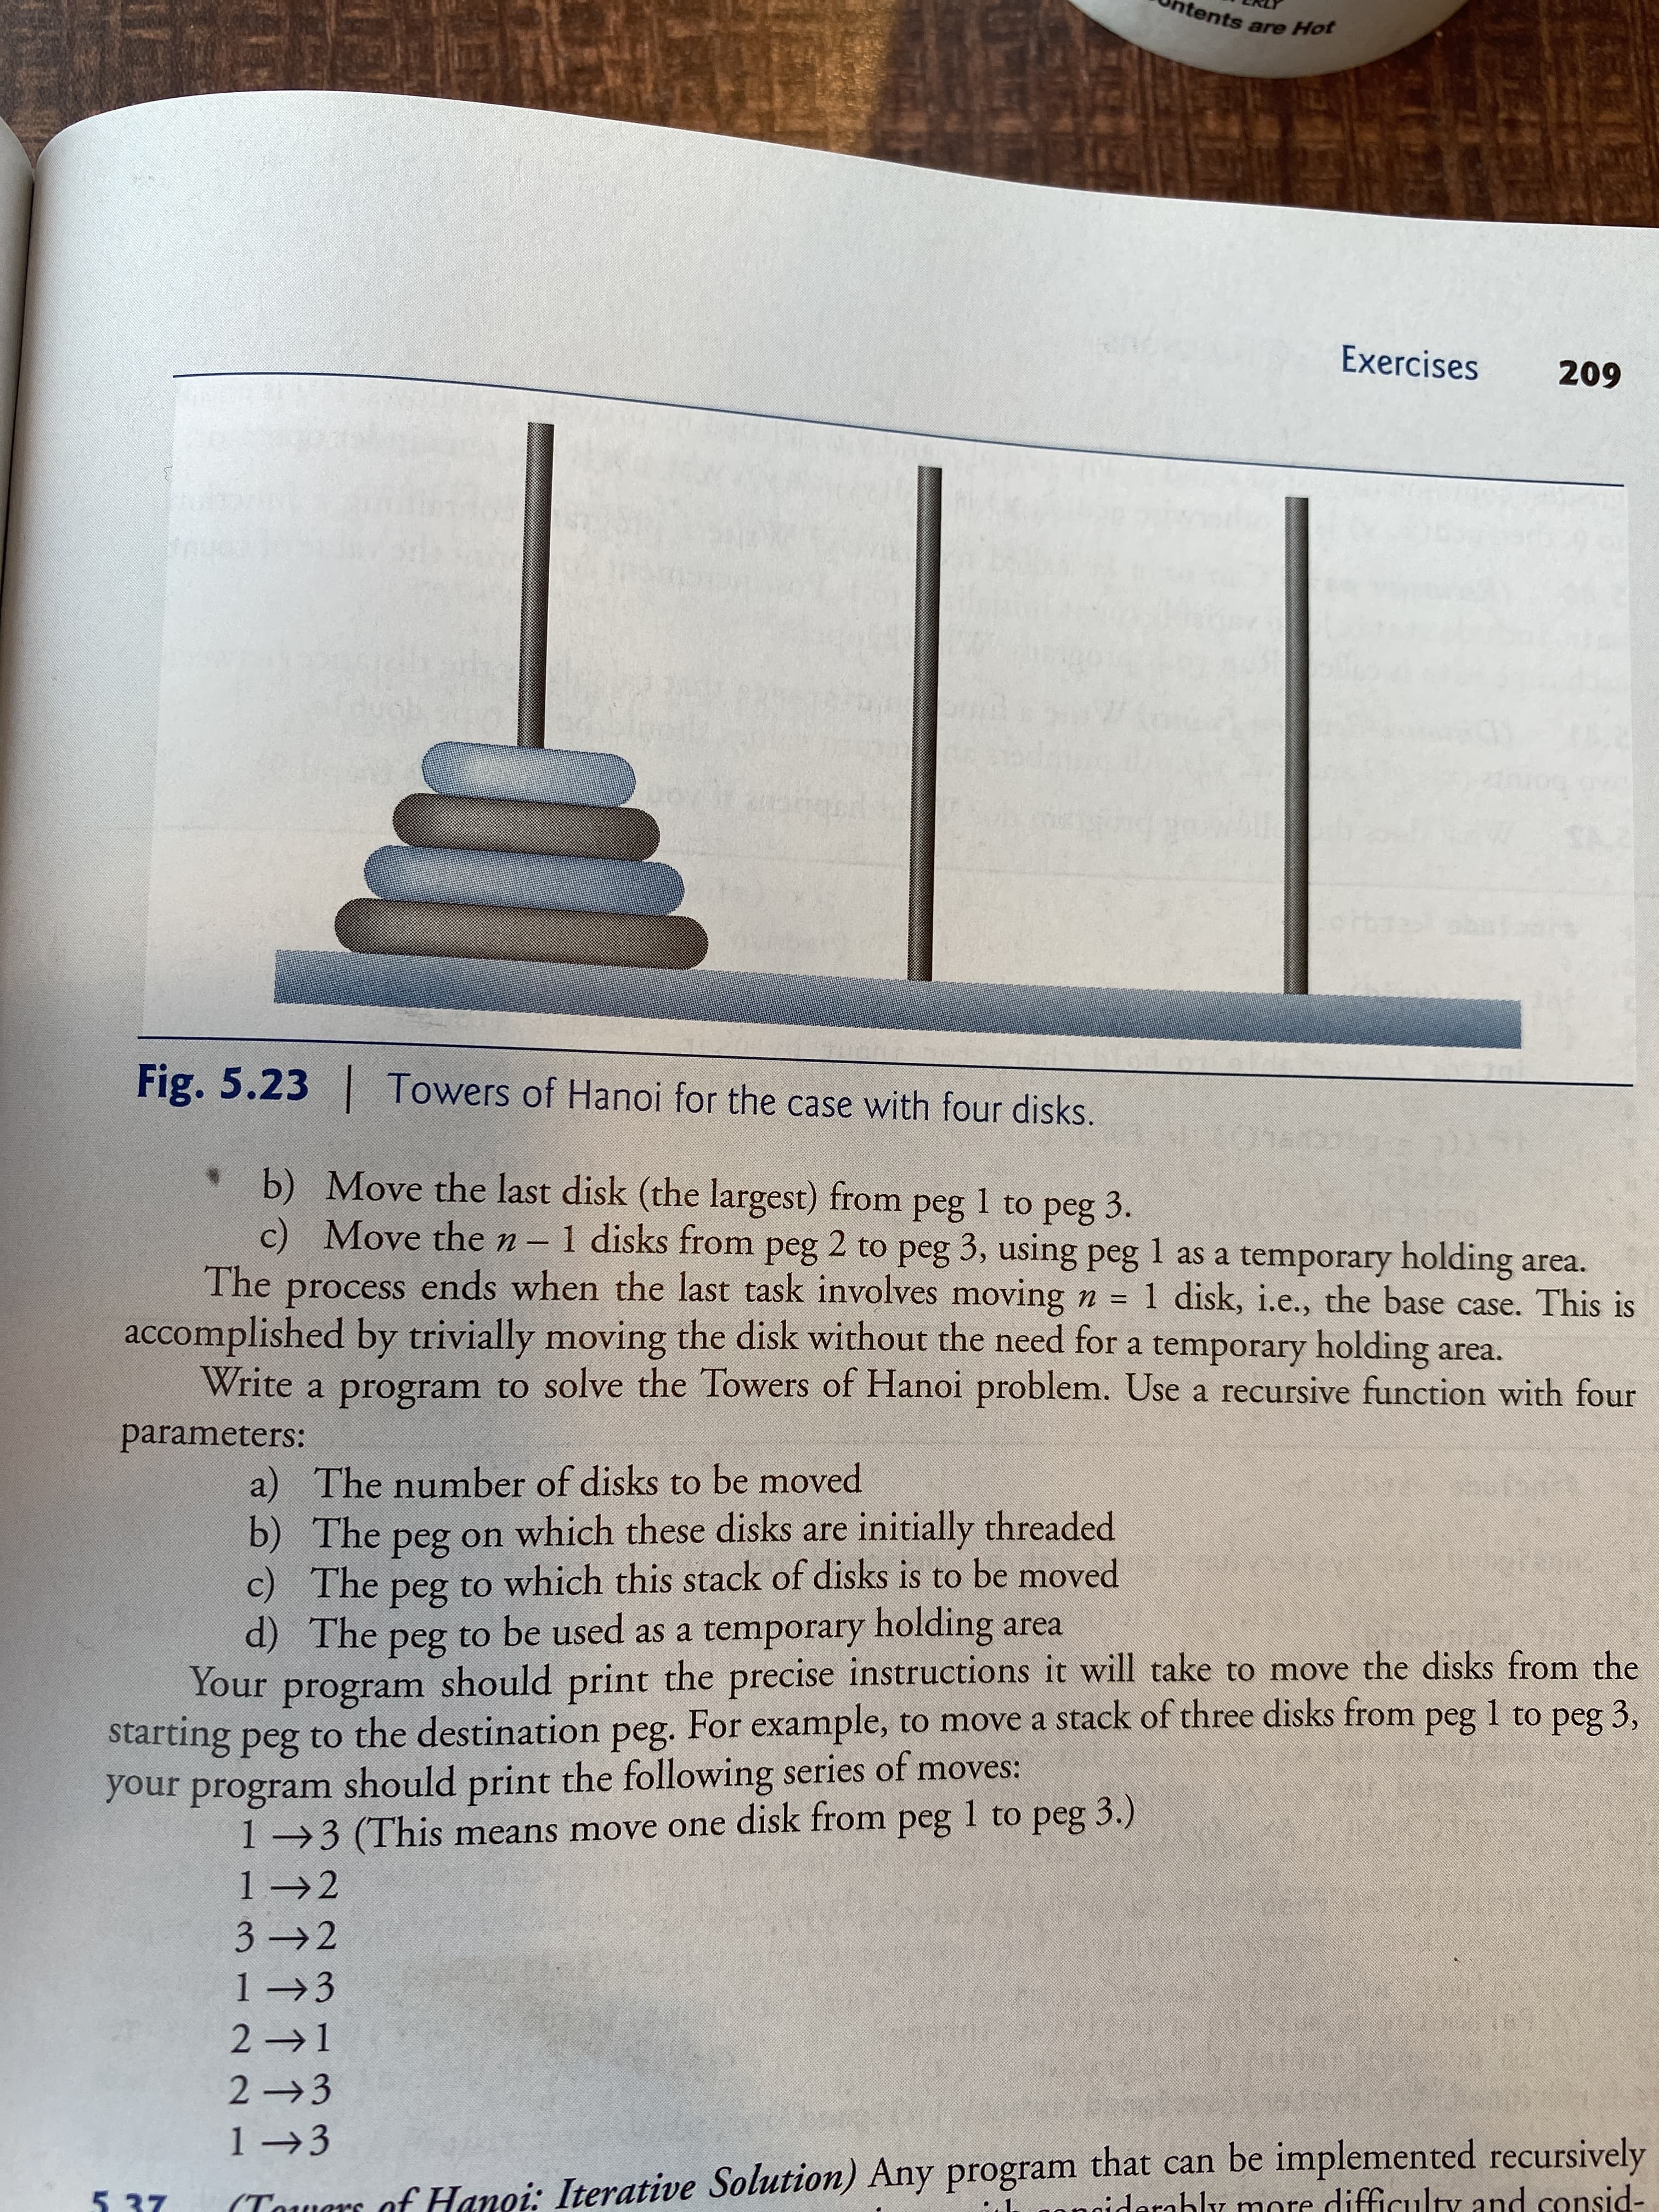 htents are Hot
Exercises
209
Fig. 5.23
Towers of Hanoi for the case with four disks.
Chato
b) Move the last disk (the largest) from peg 1 to peg 3.
c) Move then-1 disks from peg 2 to peg 3, using peg 1 as a temporary holding area.
The process ends when the last task involves moving n =
accomplished by trivially moving the disk without the need for a temporary holding area.
Write a program to solve the Towers of Hanoi problem. Use a recursive function with four
1 disk, i.e., the base case. This is
parameters:
a) The number of disks to be moved
b) The peg on which these disks are initially threaded
c) The
d) The peg to be used as a temporary holding area
Your
to which this stack of disks is to be moved
peg
program should print the precise instructions it will take to move the disks from the
starting peg to the destination peg. For example, to move a stack of three disks from peg 1 to peg 3,
your program should print the following series of moves:
1→3 (This means move one disk from peg 1 to peg 3.)
1 →2
3 2
1 →3
2 1
2 3
1 →3
(Towars of Hanoi: Iterative Solution) Any program that can be implemented recursively
ngiderably more difficulty and consid-
5. 37
